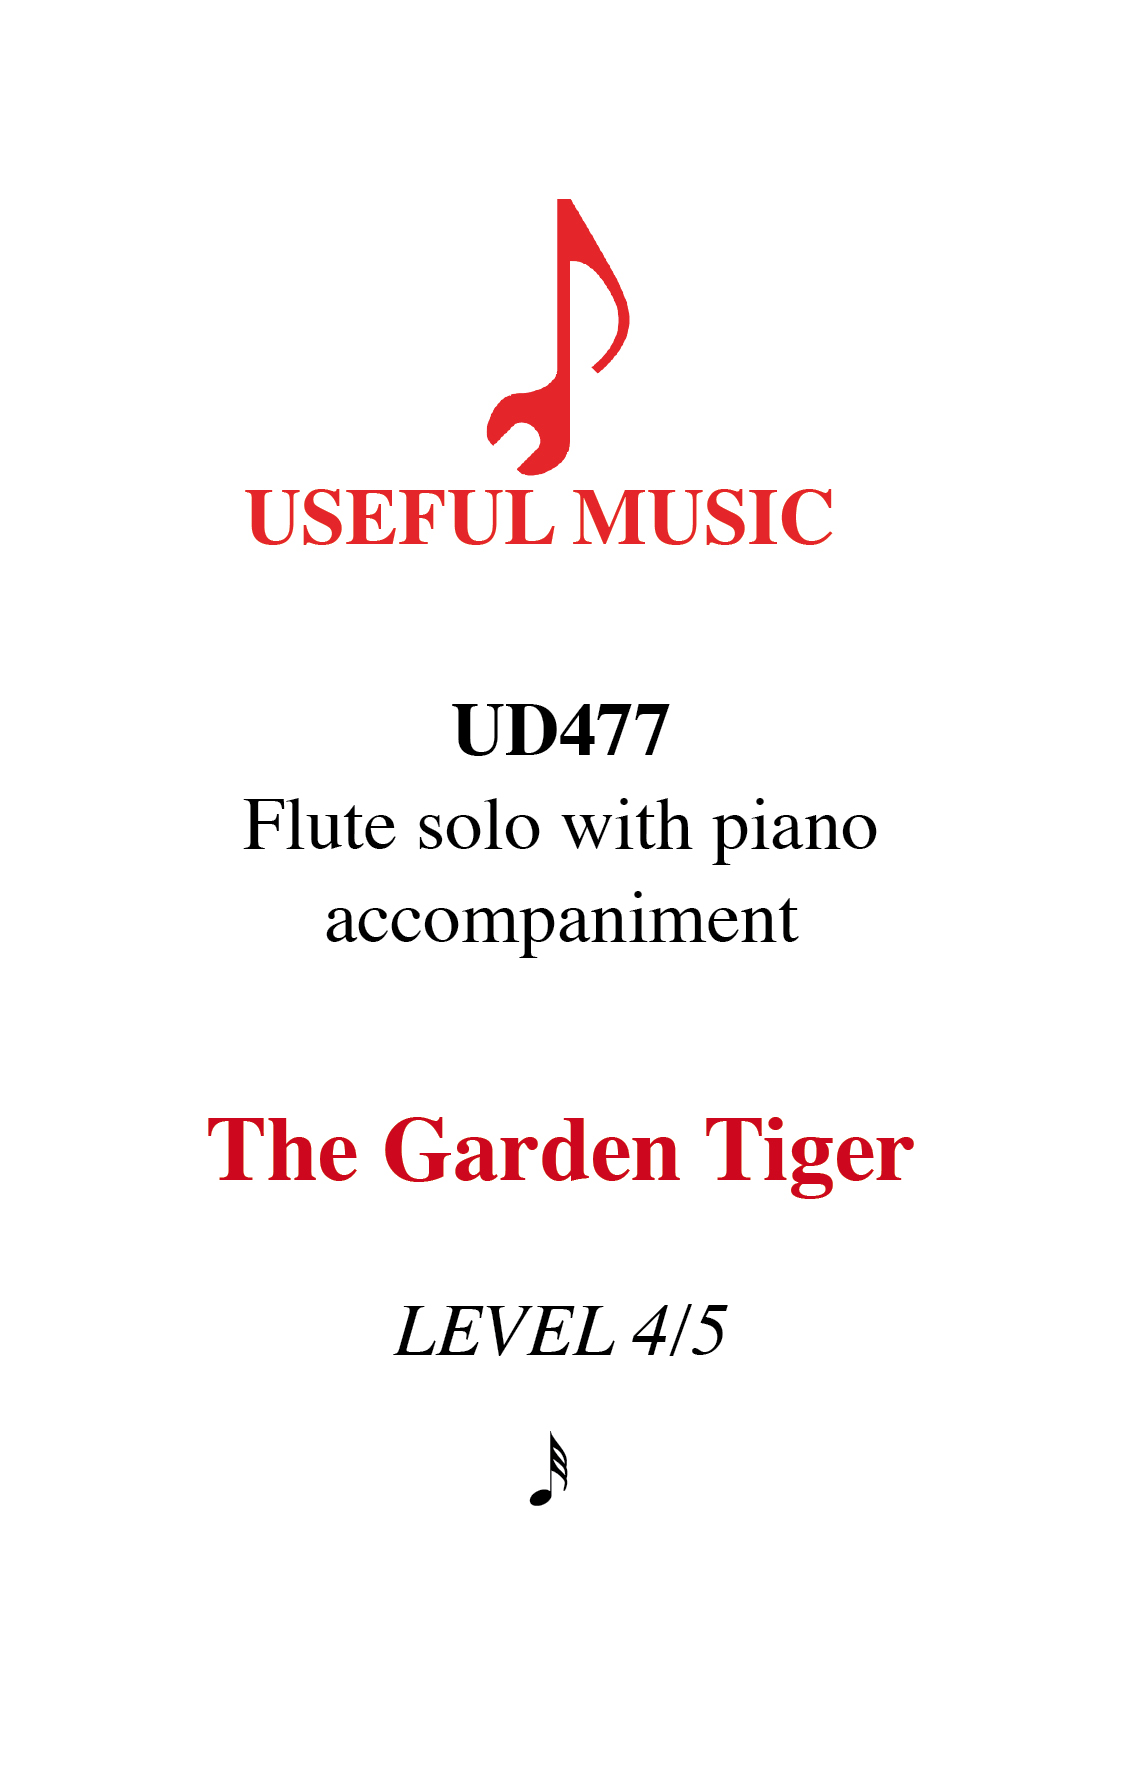 The Garden Tiger - flute with piano accompaniment